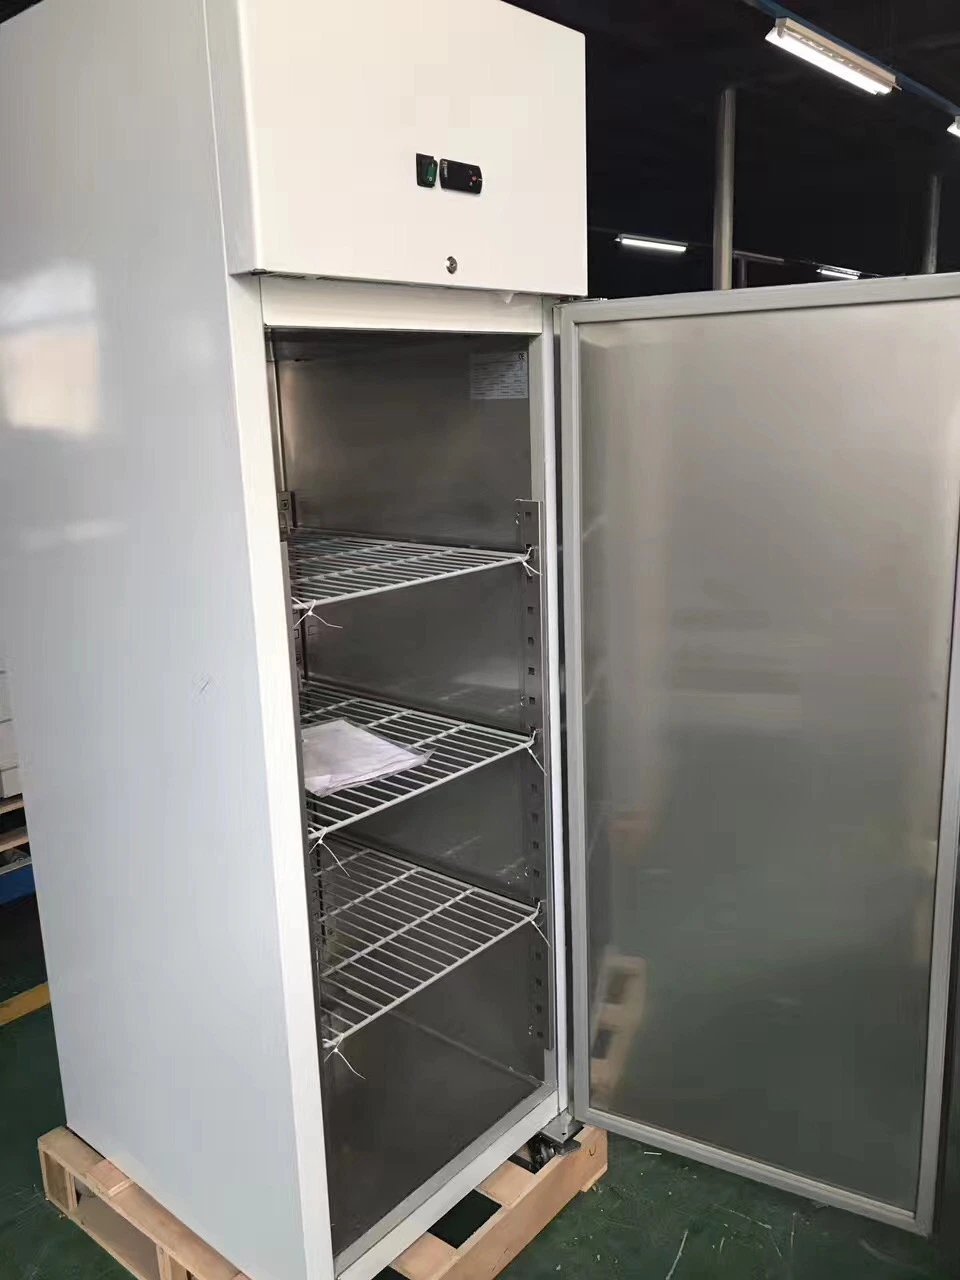 Auto-Defrost Stainless Steel Commercial Kitchen Chiller Upright Refrigerator